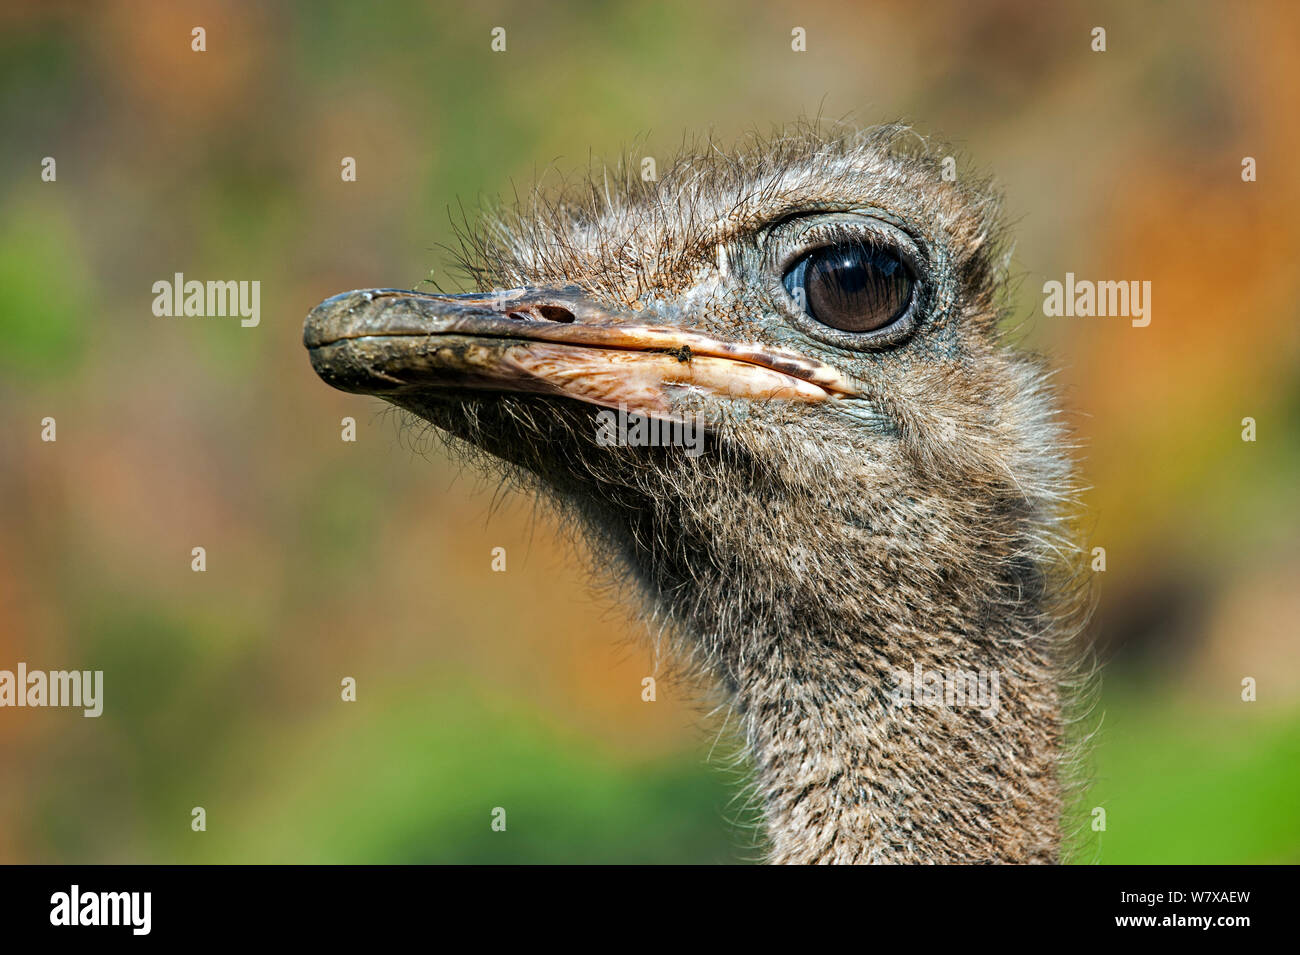 Common ostrich (Struthio camelus) close up of head, Cabarceno Park, Cantabria, Spain. Captive, occurs in Africa. Stock Photo